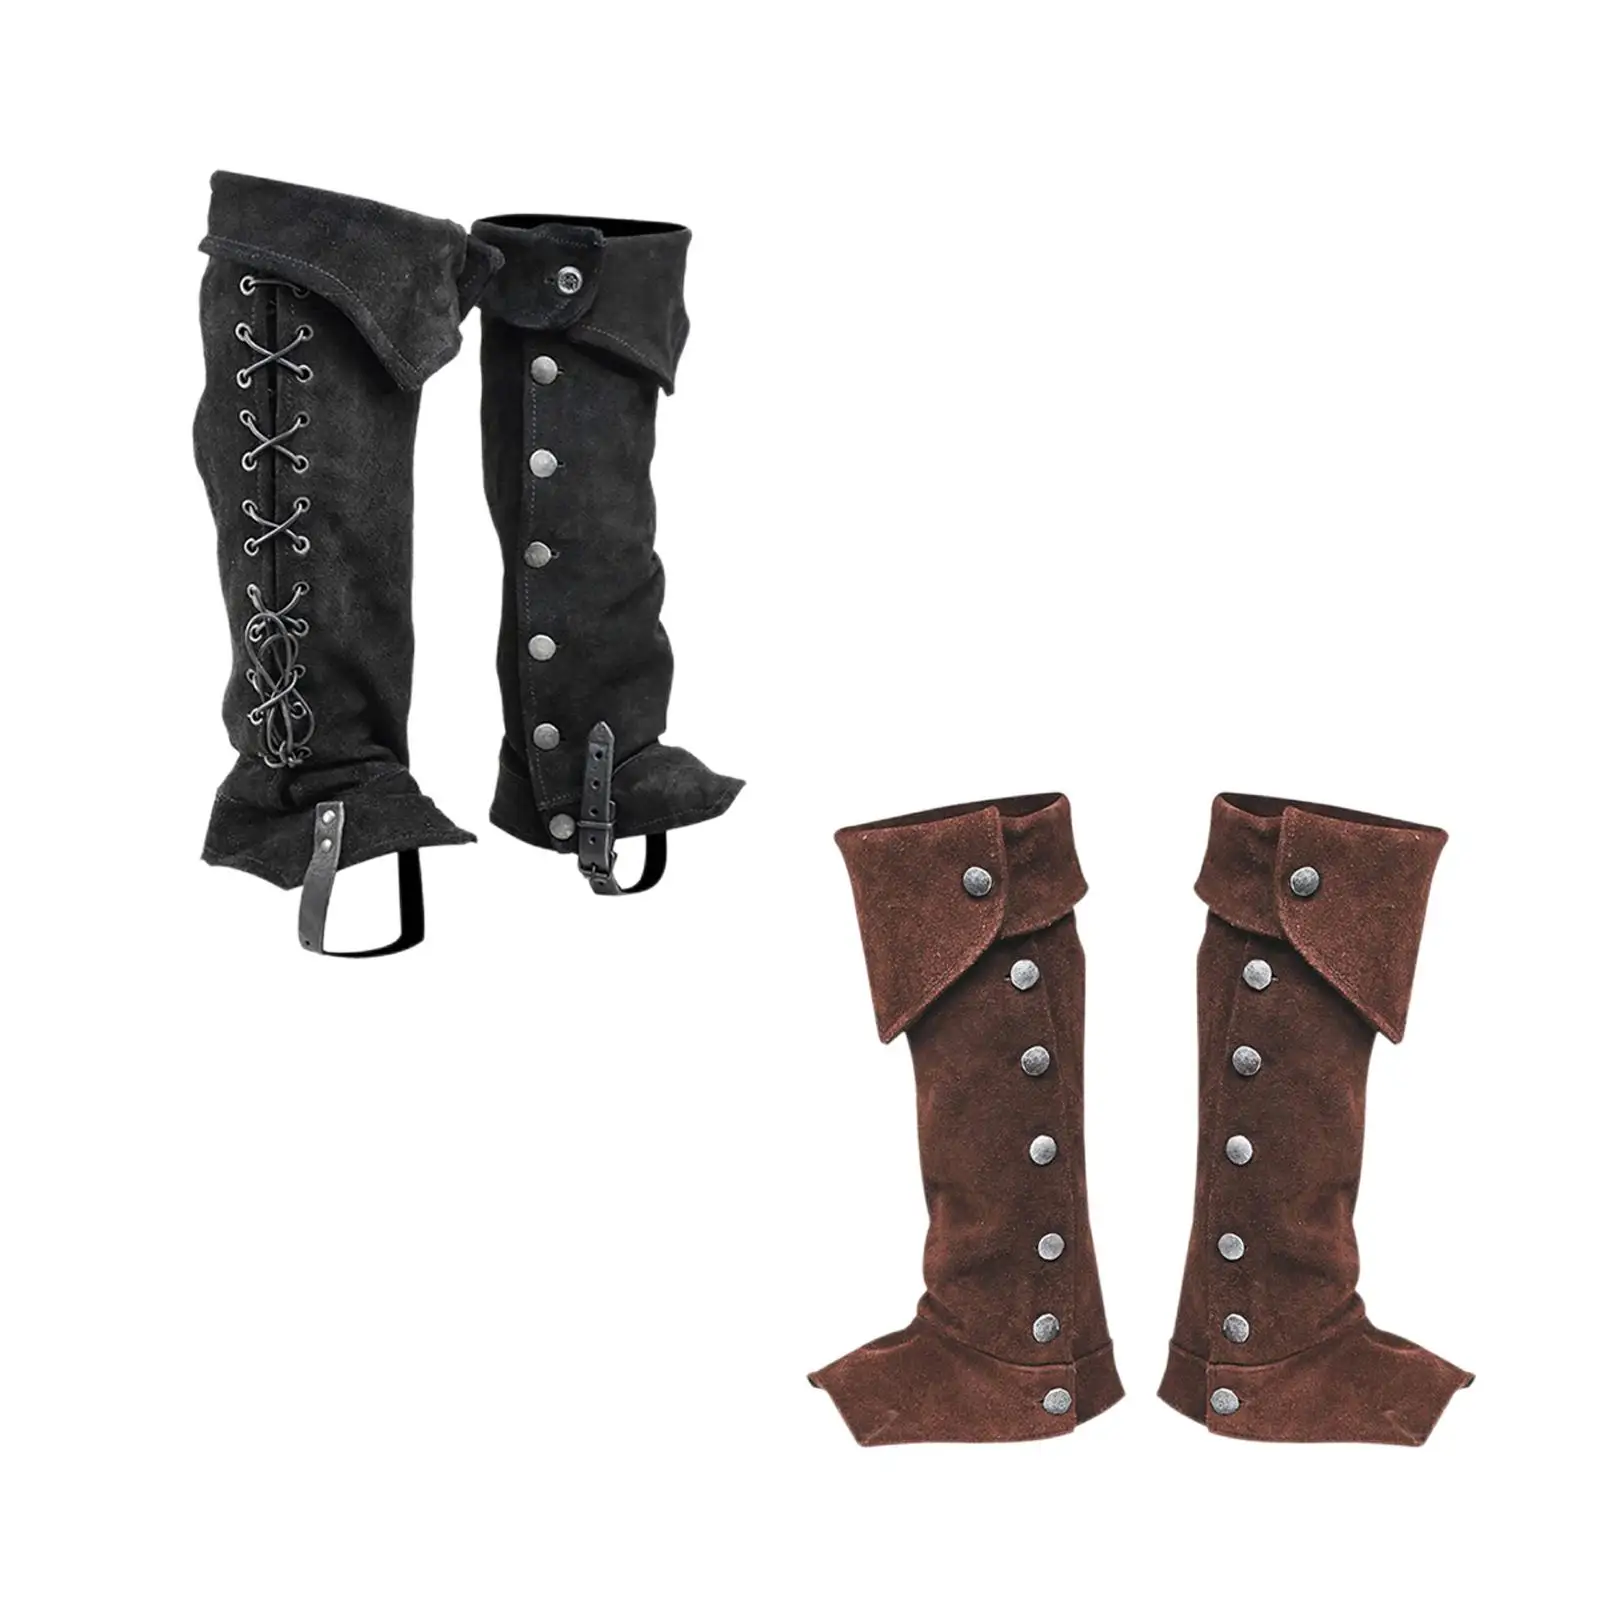 Medieval Gaiters Pirate Boot Tops Shoes Cover Soldier Leg Guards Cosplay